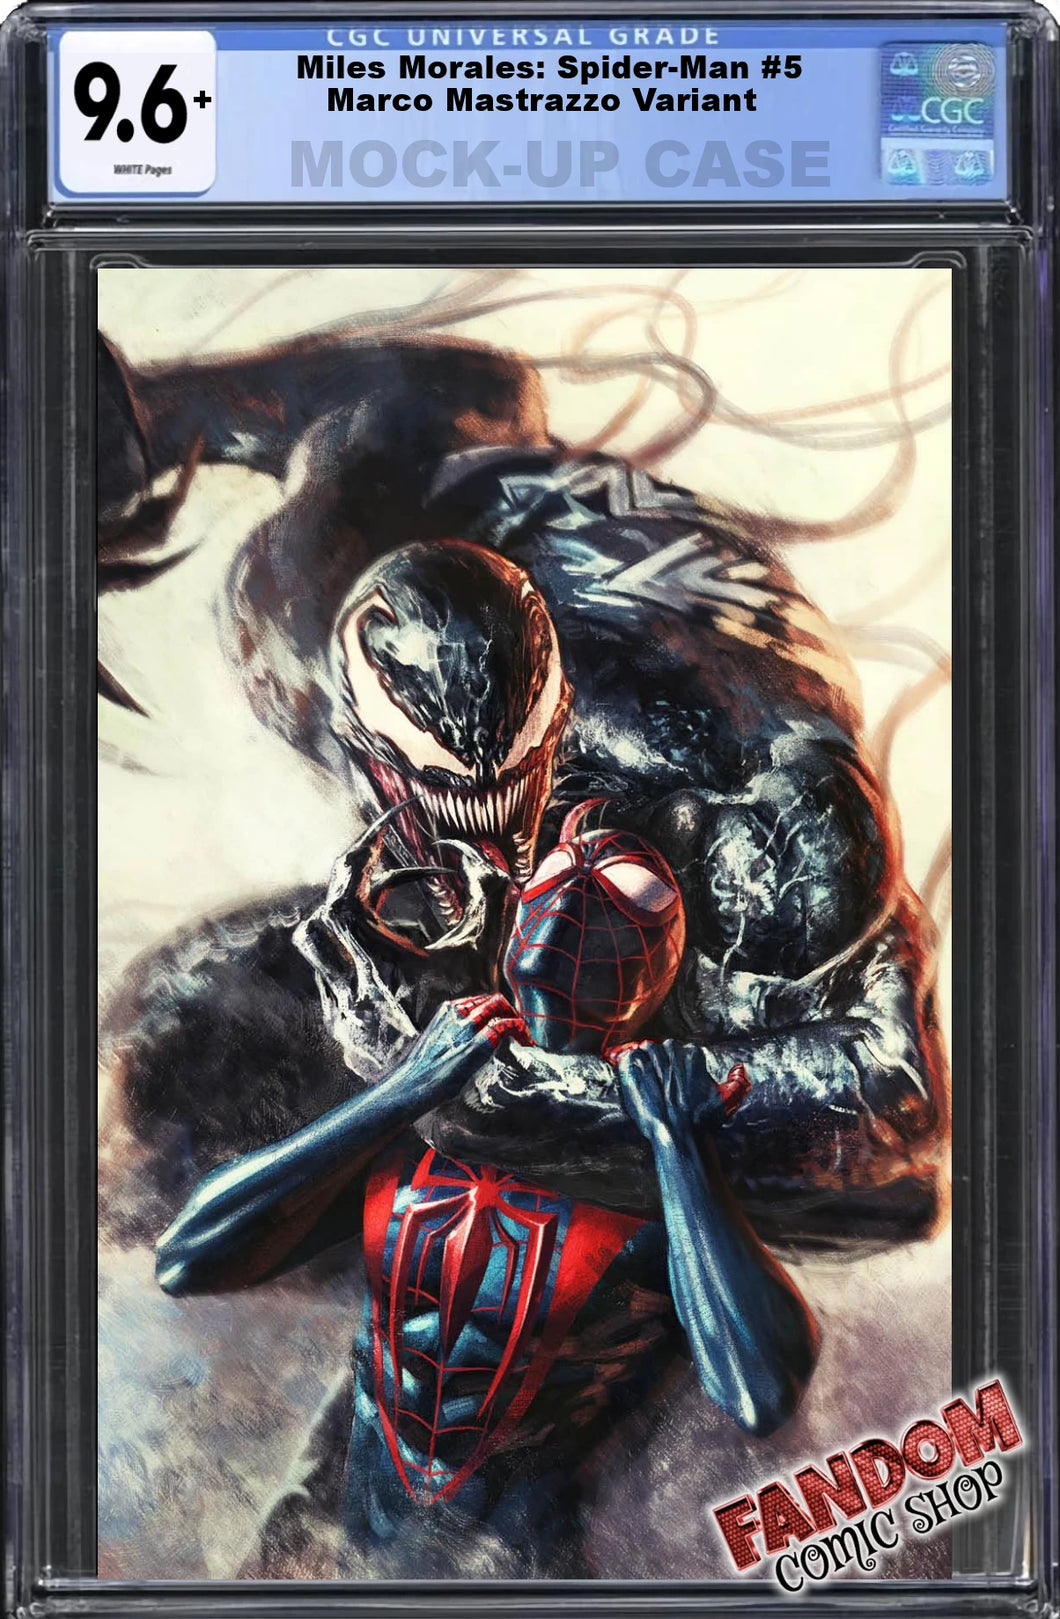 MILES MORALES: SPIDER-MAN #5 (MARCO MASTRAZZO EXCLUSIVE VIRGIN VARIANT ~ CGC Graded 9.6 or Better